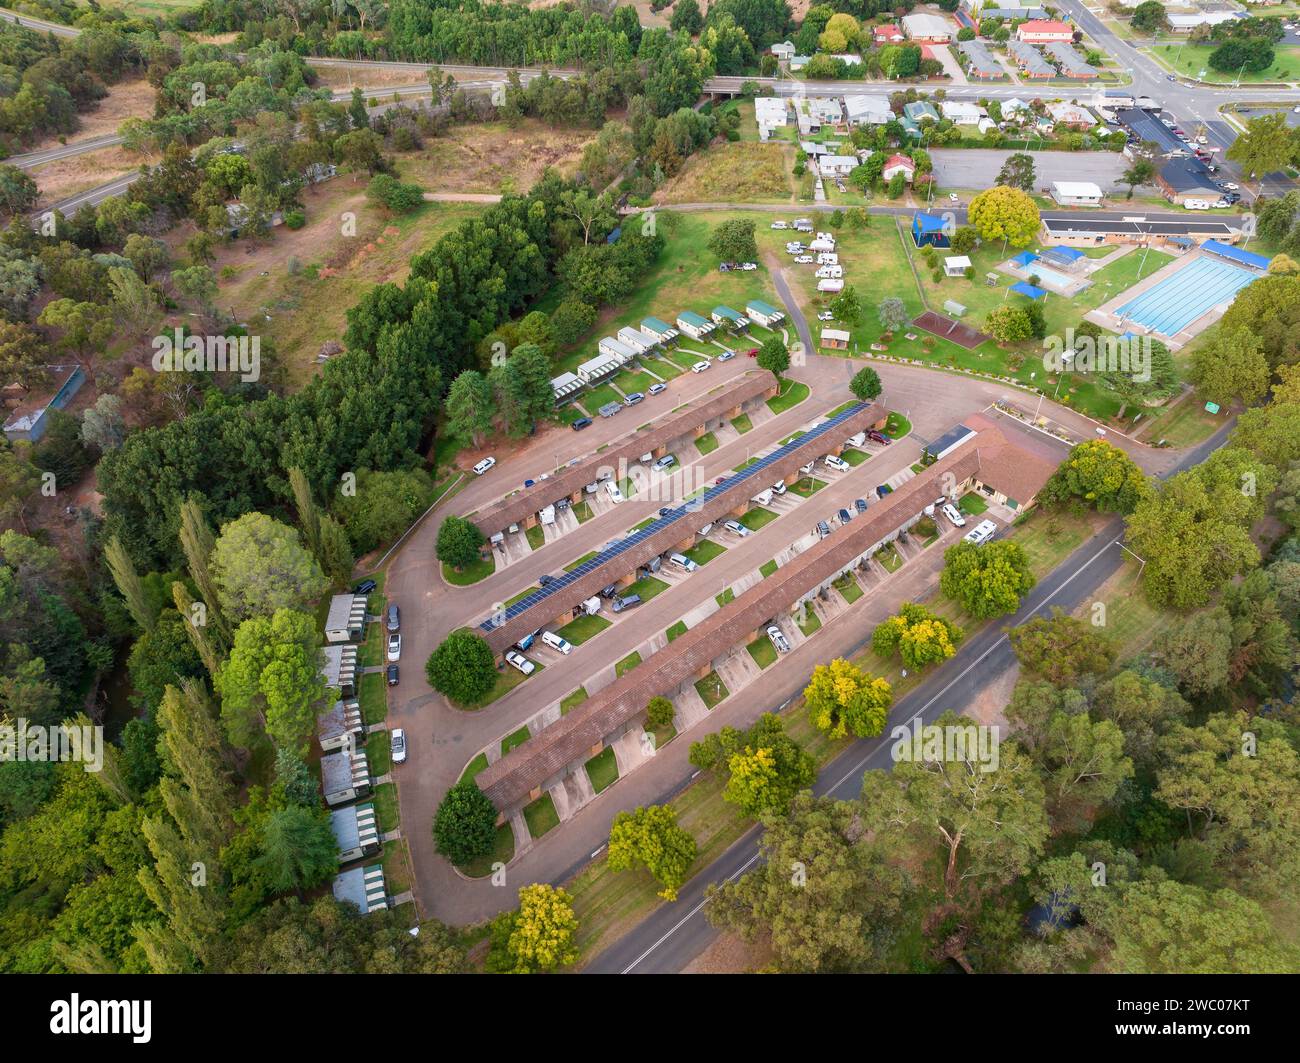 Aerial view over a caravan park in a rural town surrounded by green trees at Gundagai in New South Wales, Australia Stock Photo